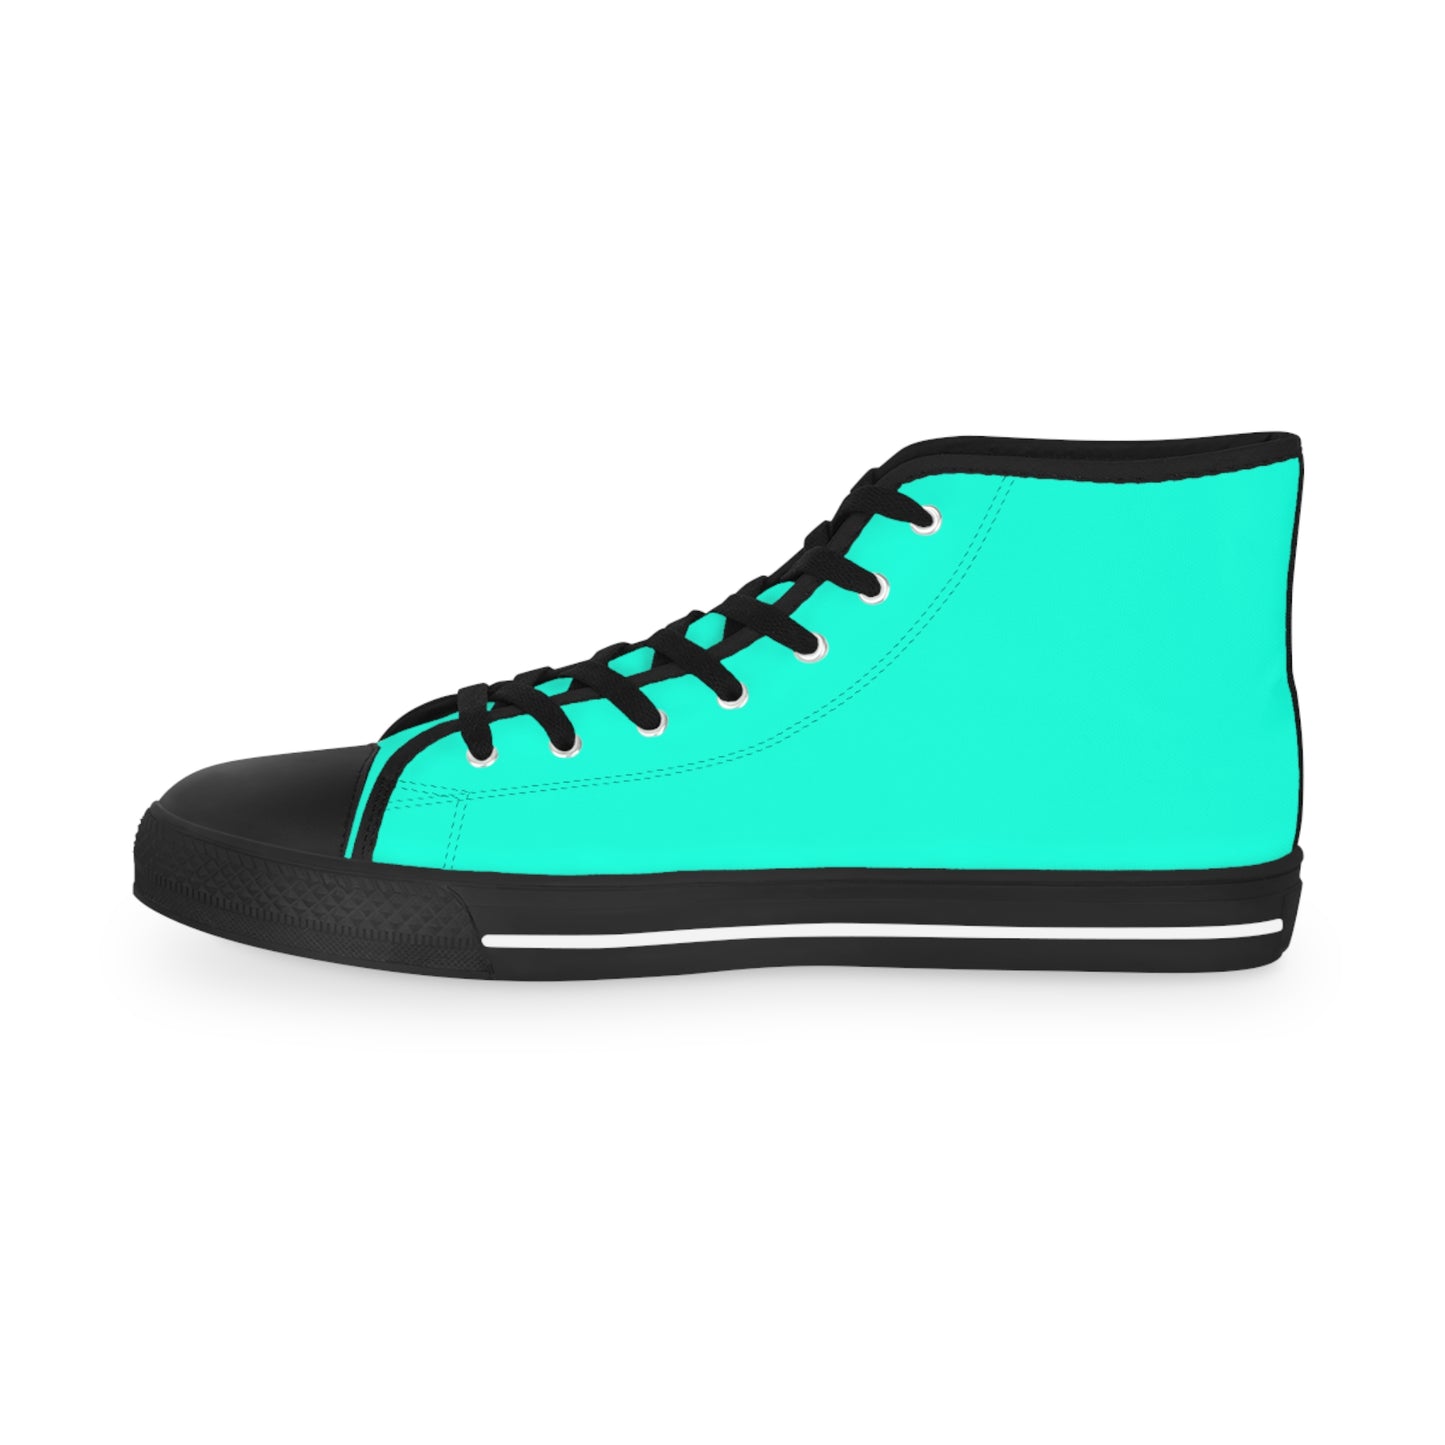 Men's Canvas High Top Solid Color Sneakers - Cool Pool Aqua Green US 14 White sole